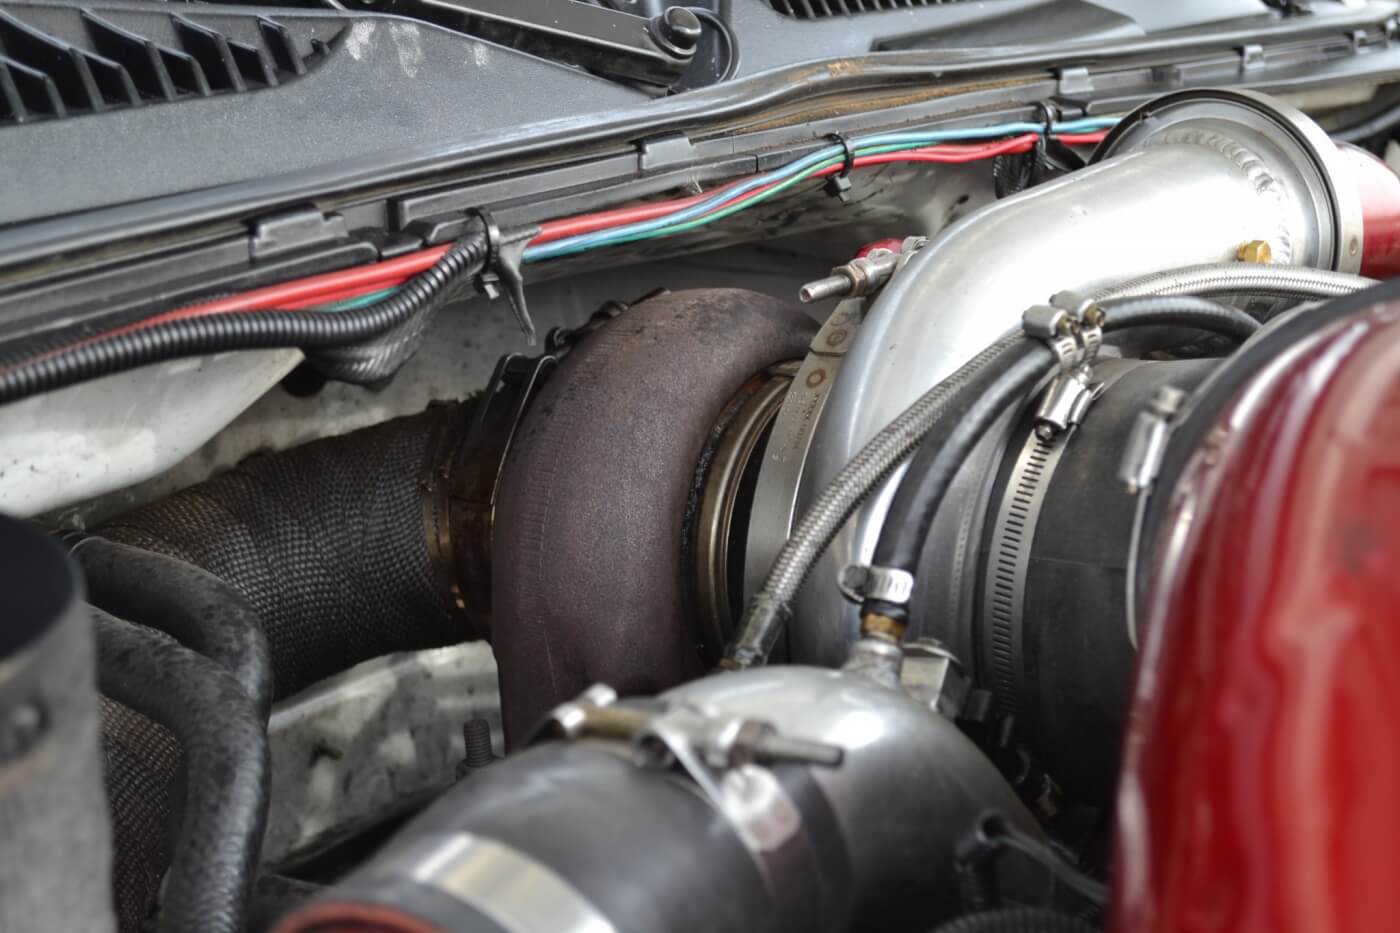 Truck's competing in the 3.0 Class can only have a 3.0-inch (76.2mm) turbocharger, so we were surprised to learn that John normally runs a 88mm S400-based charger, that's been configured for 3.0 Class rules.